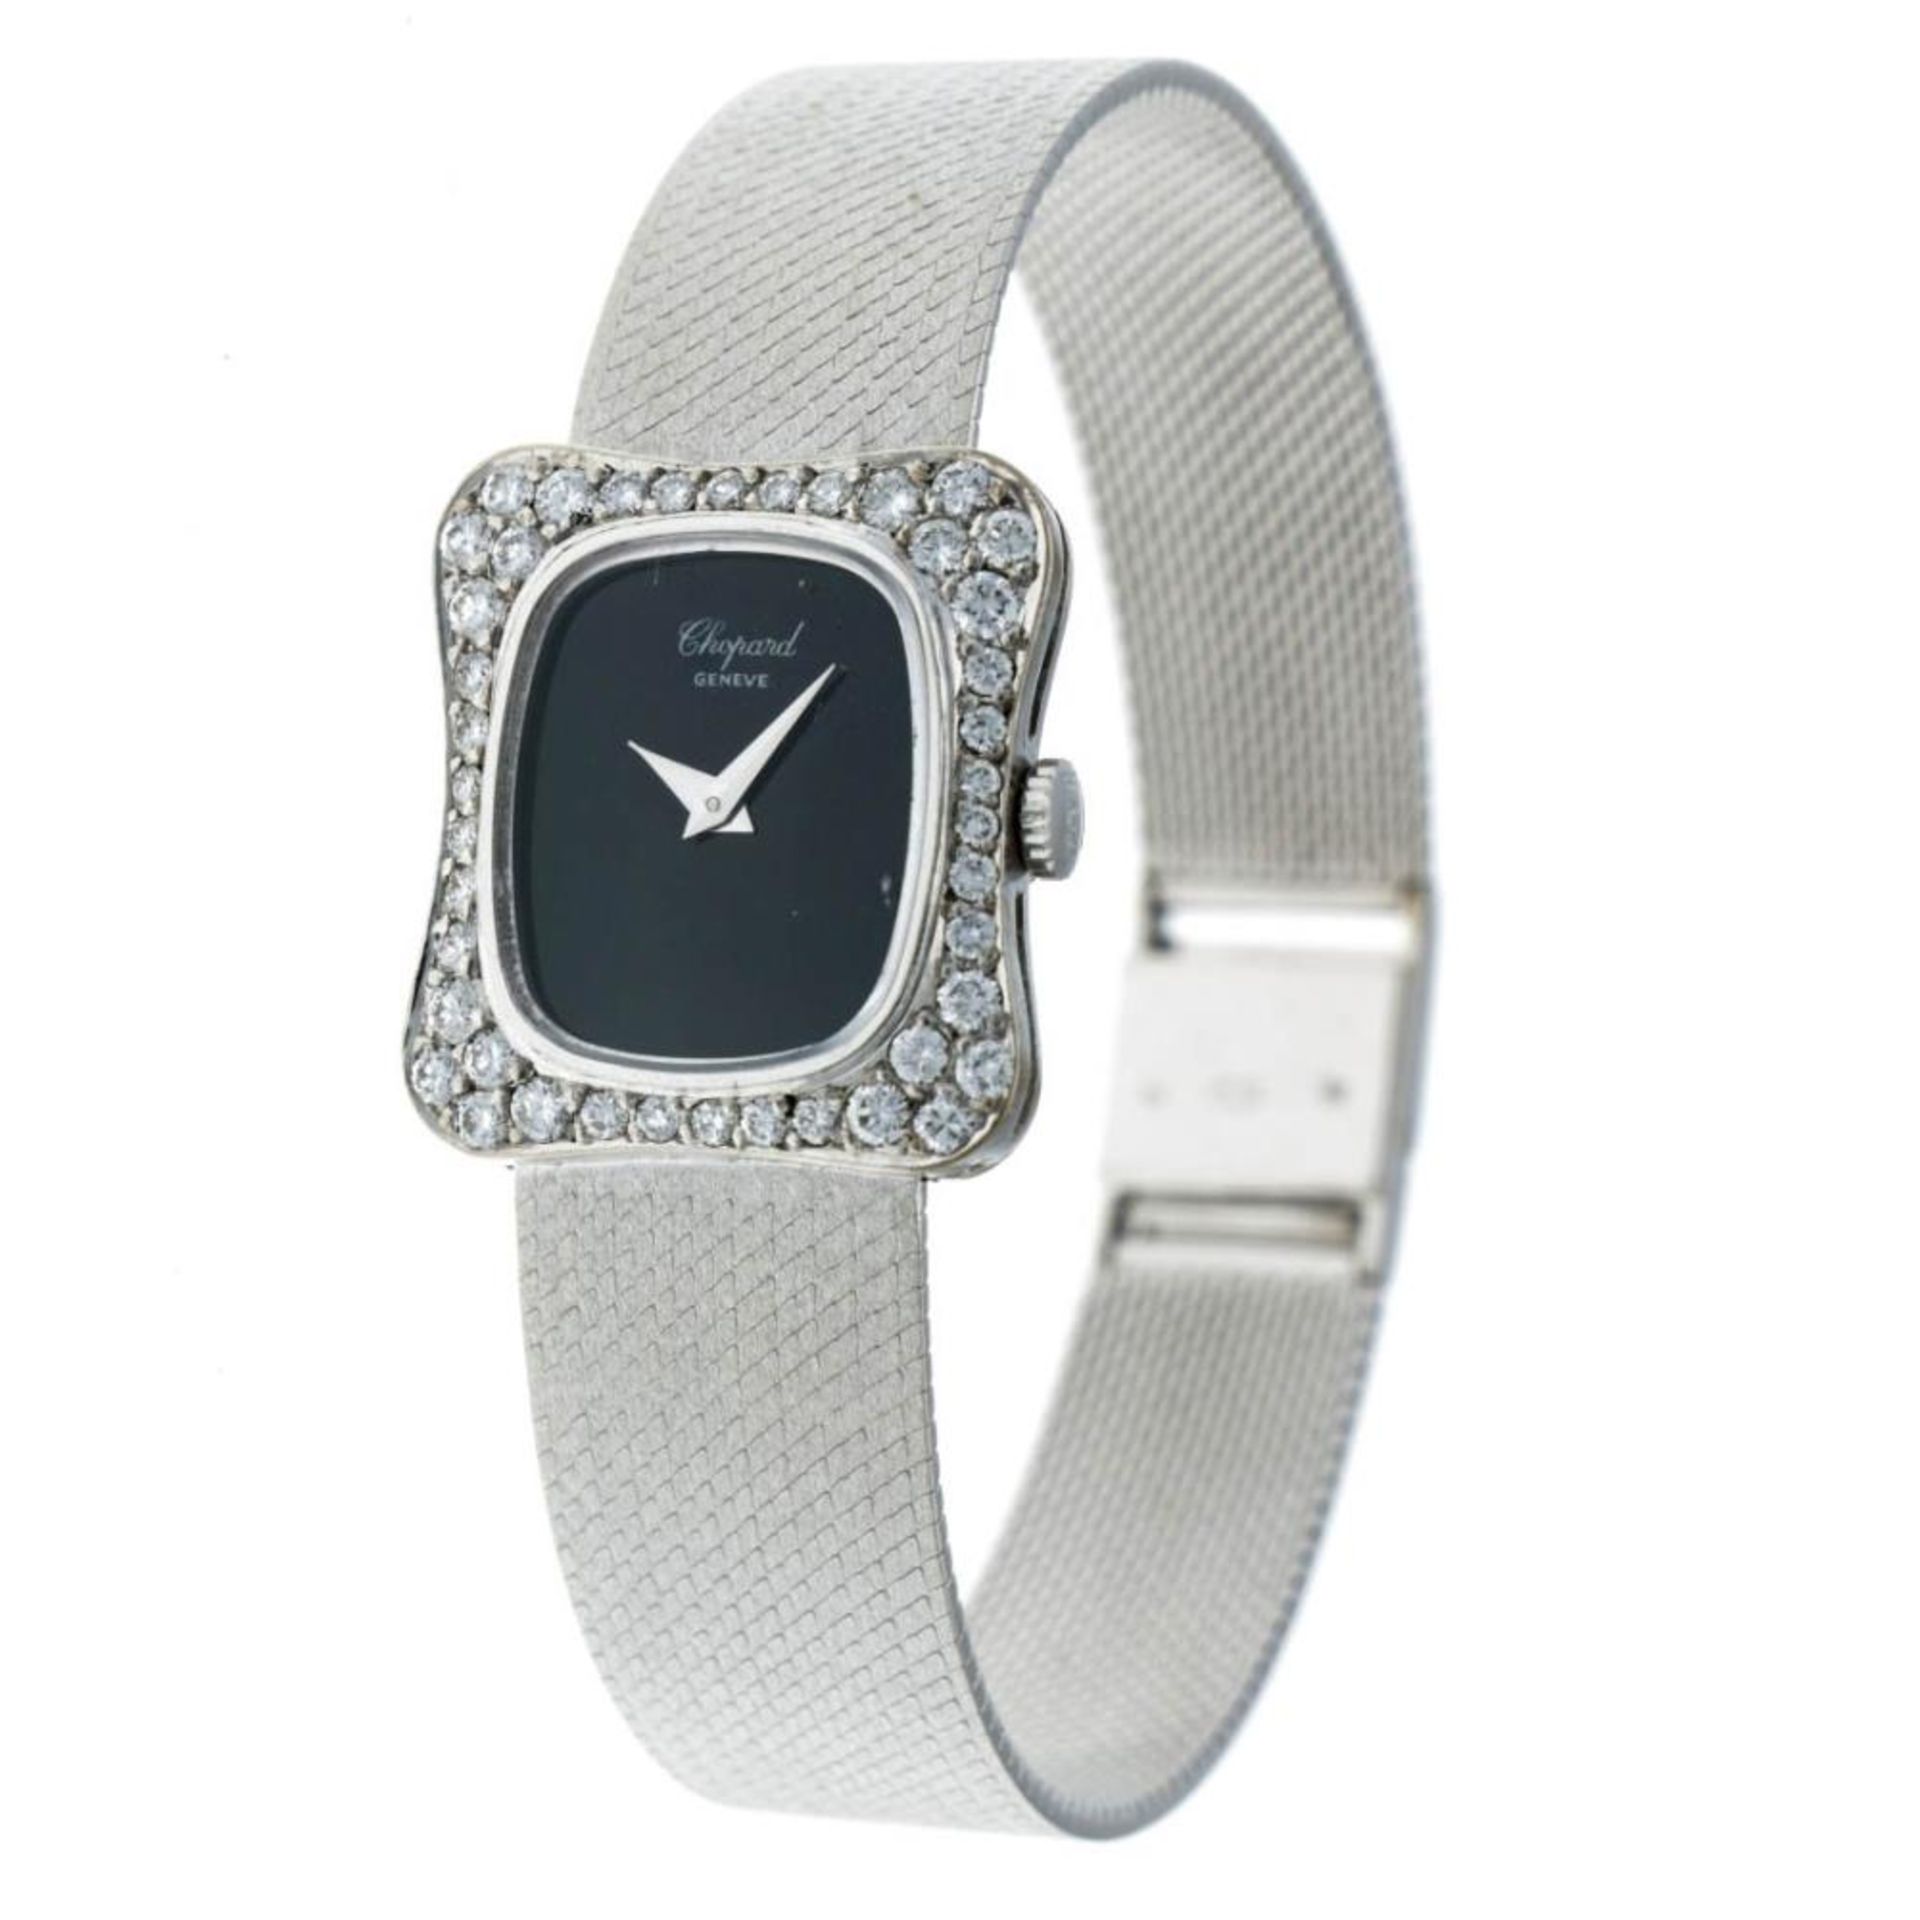 Chopard 5028 1 - Ladies watch - approx. 1980. - Image 3 of 10